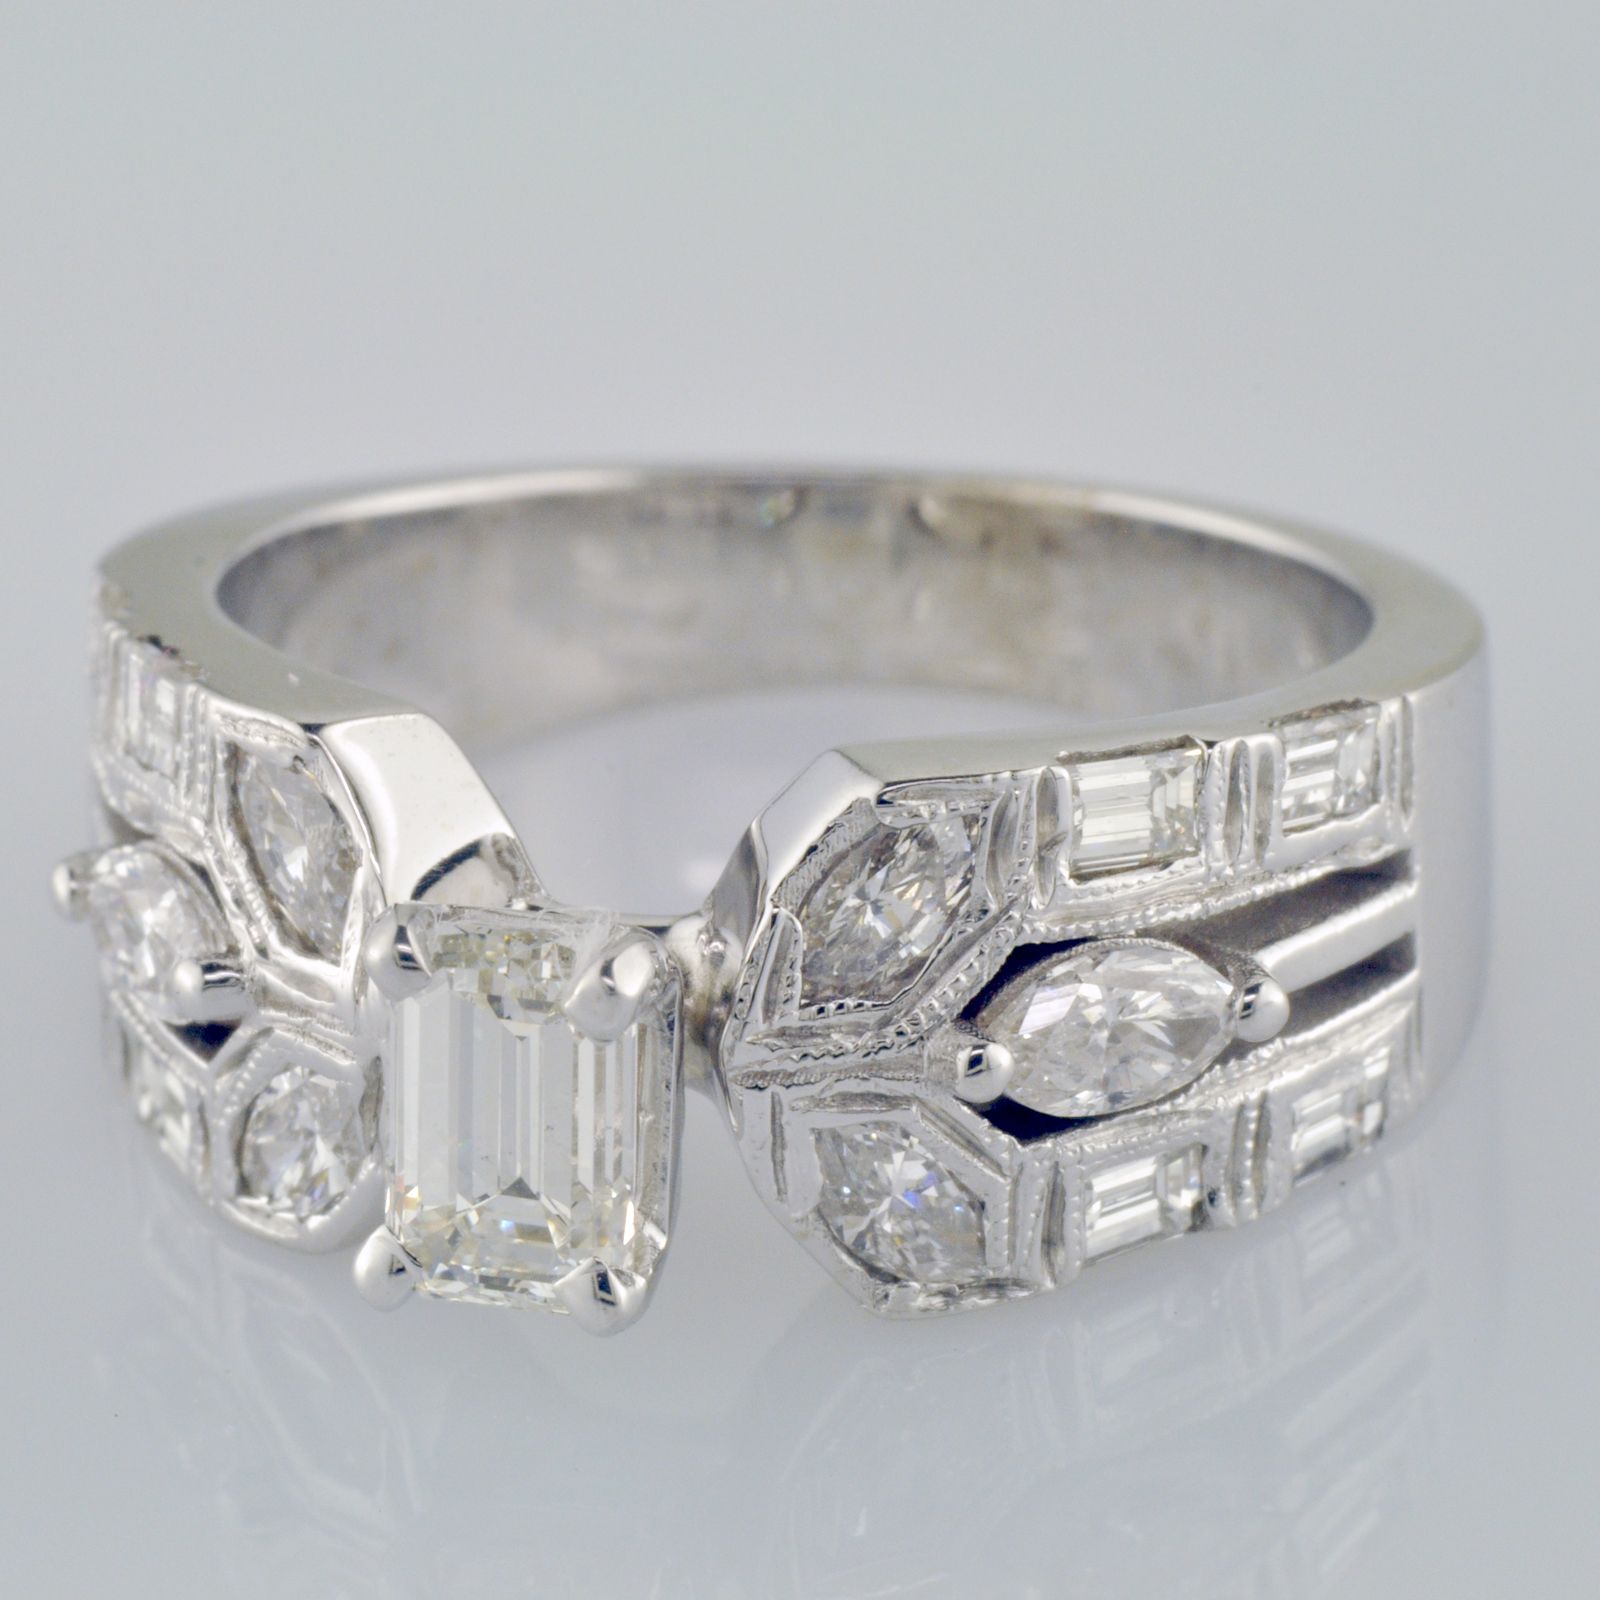 Diamond Engagement Ring with 1 97 Carat Emerald Cut in 14k White Gold